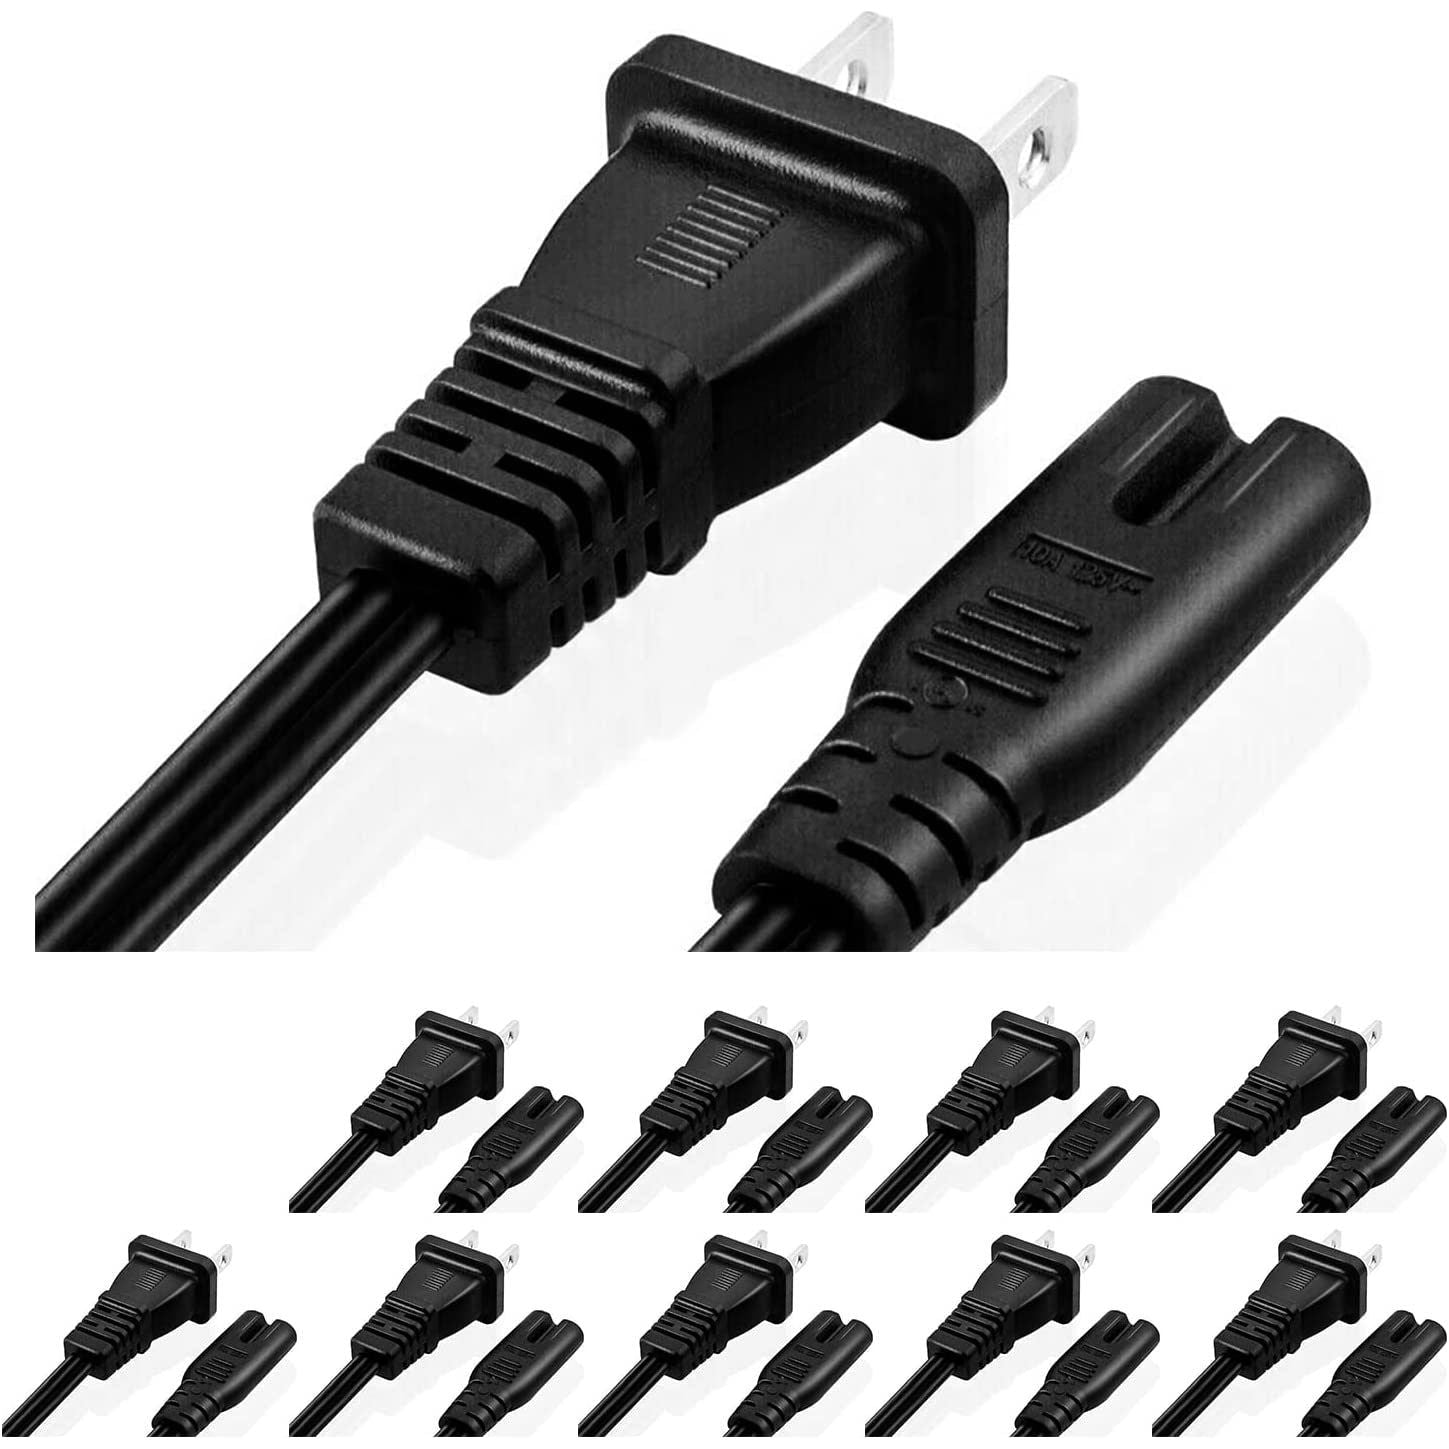 5Core Extra Long AC Wall Power Cord for Led LCD TV Vizio Samsung 12 Feet 2 Prong PP 1002